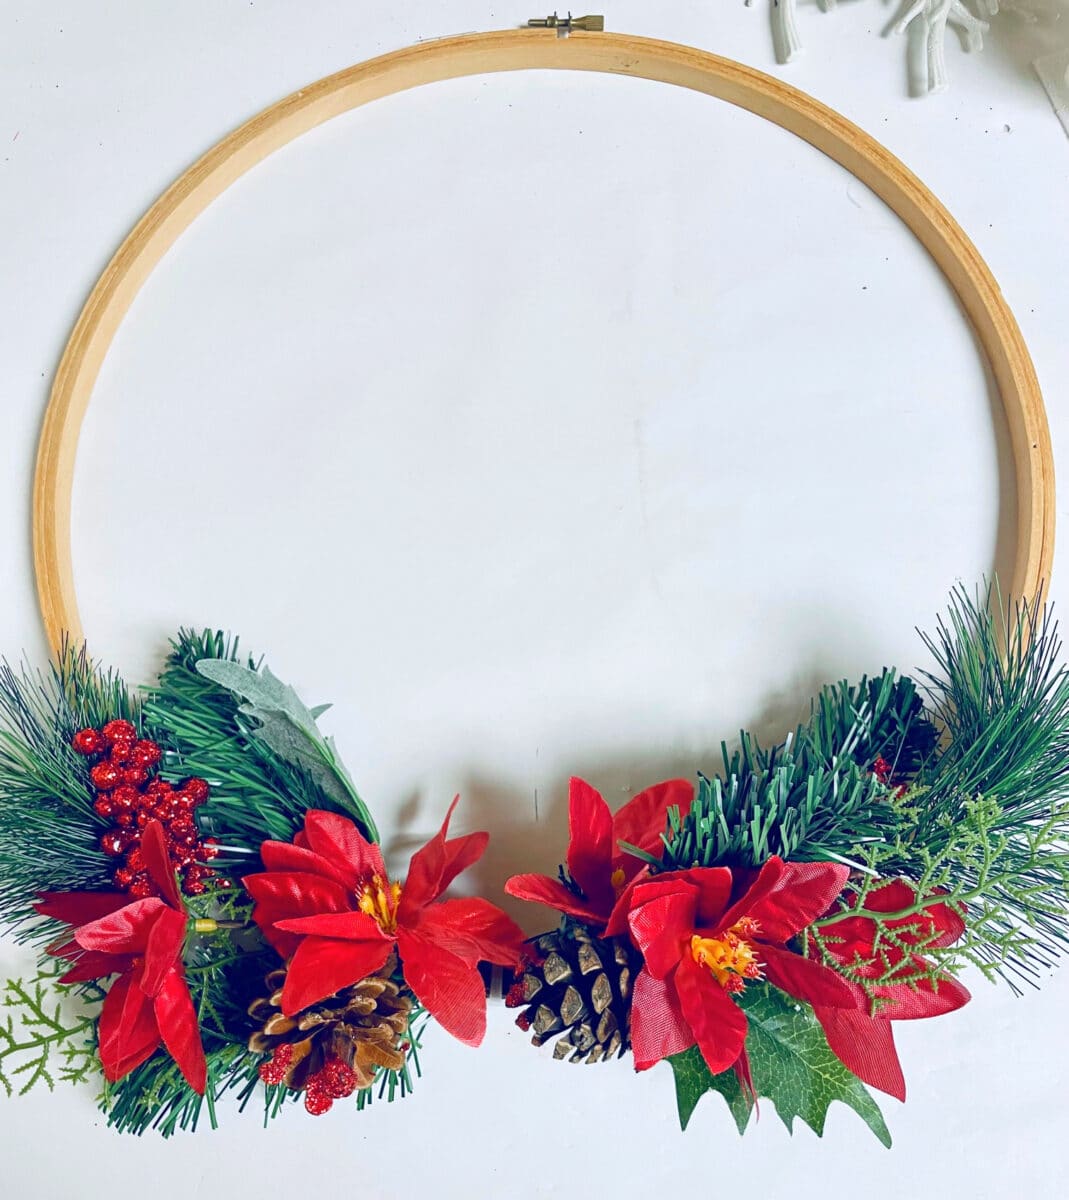 A wooden hoop with red poinsettias and pine cones.